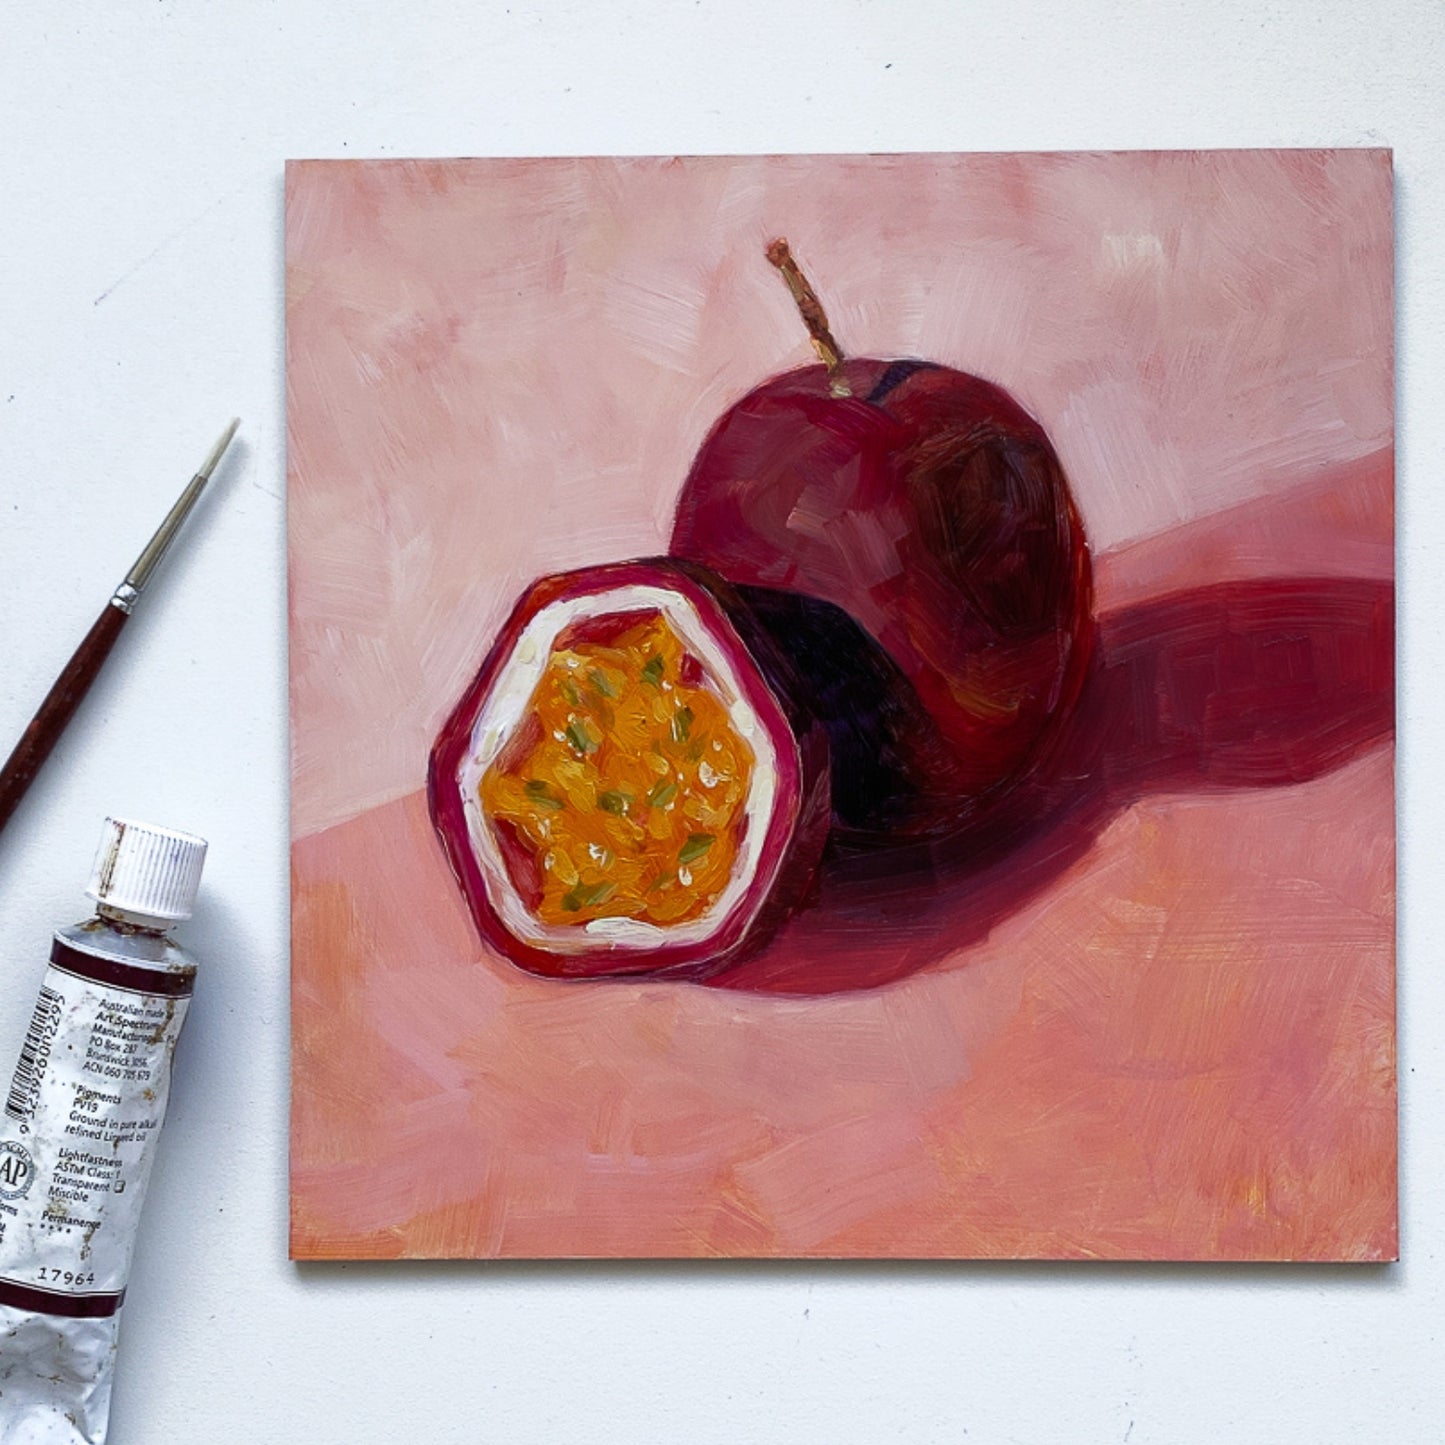 styling photo of an original painting of a burgundy, magenta whole passionfruit and half a passionfruit with seeds. They are sitting on a soft pink surface and there are strong shadows and a diagonal background. The painting is on a white surface and there is a paintbrush and oil paint tube next to it.